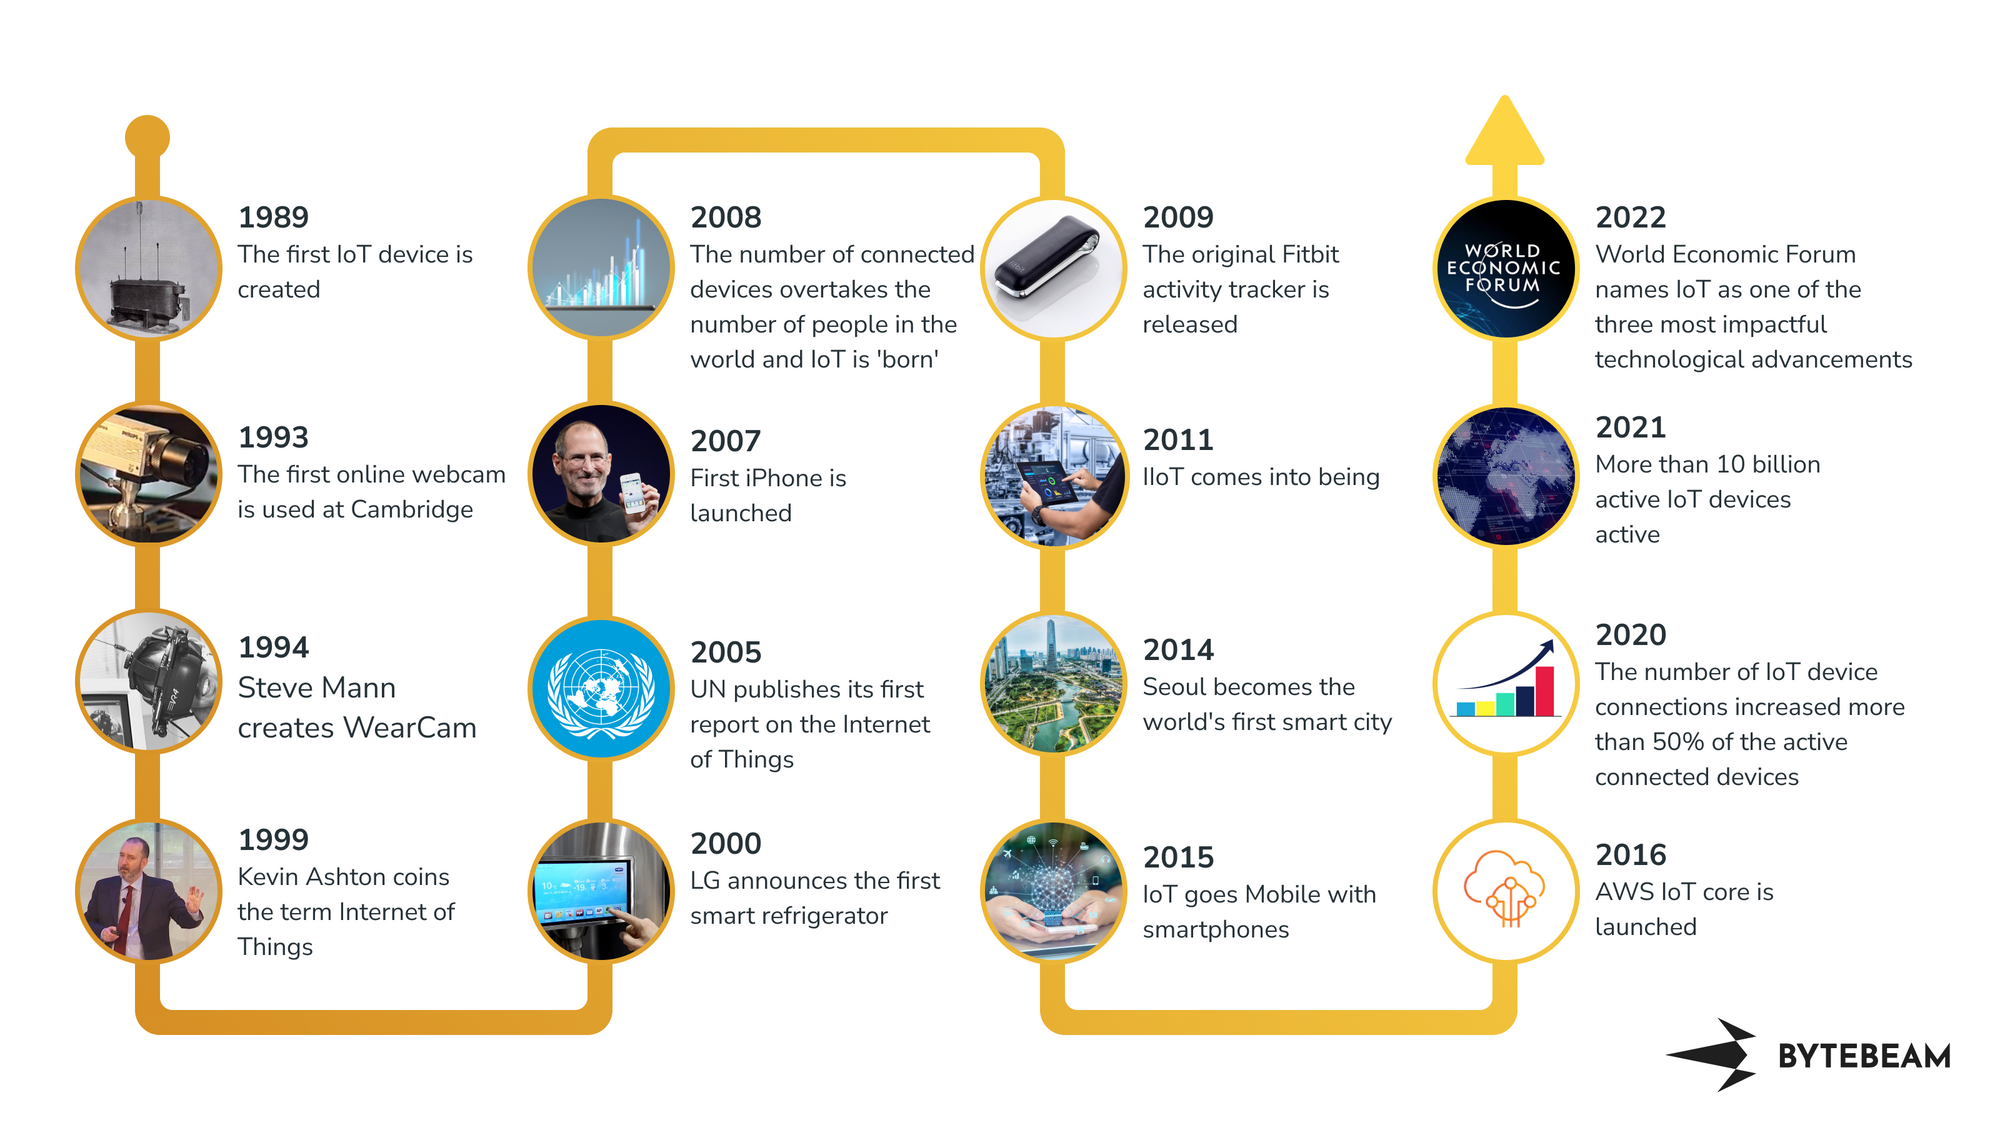 Evolution of Internet of Things (IoT) - A Brief History